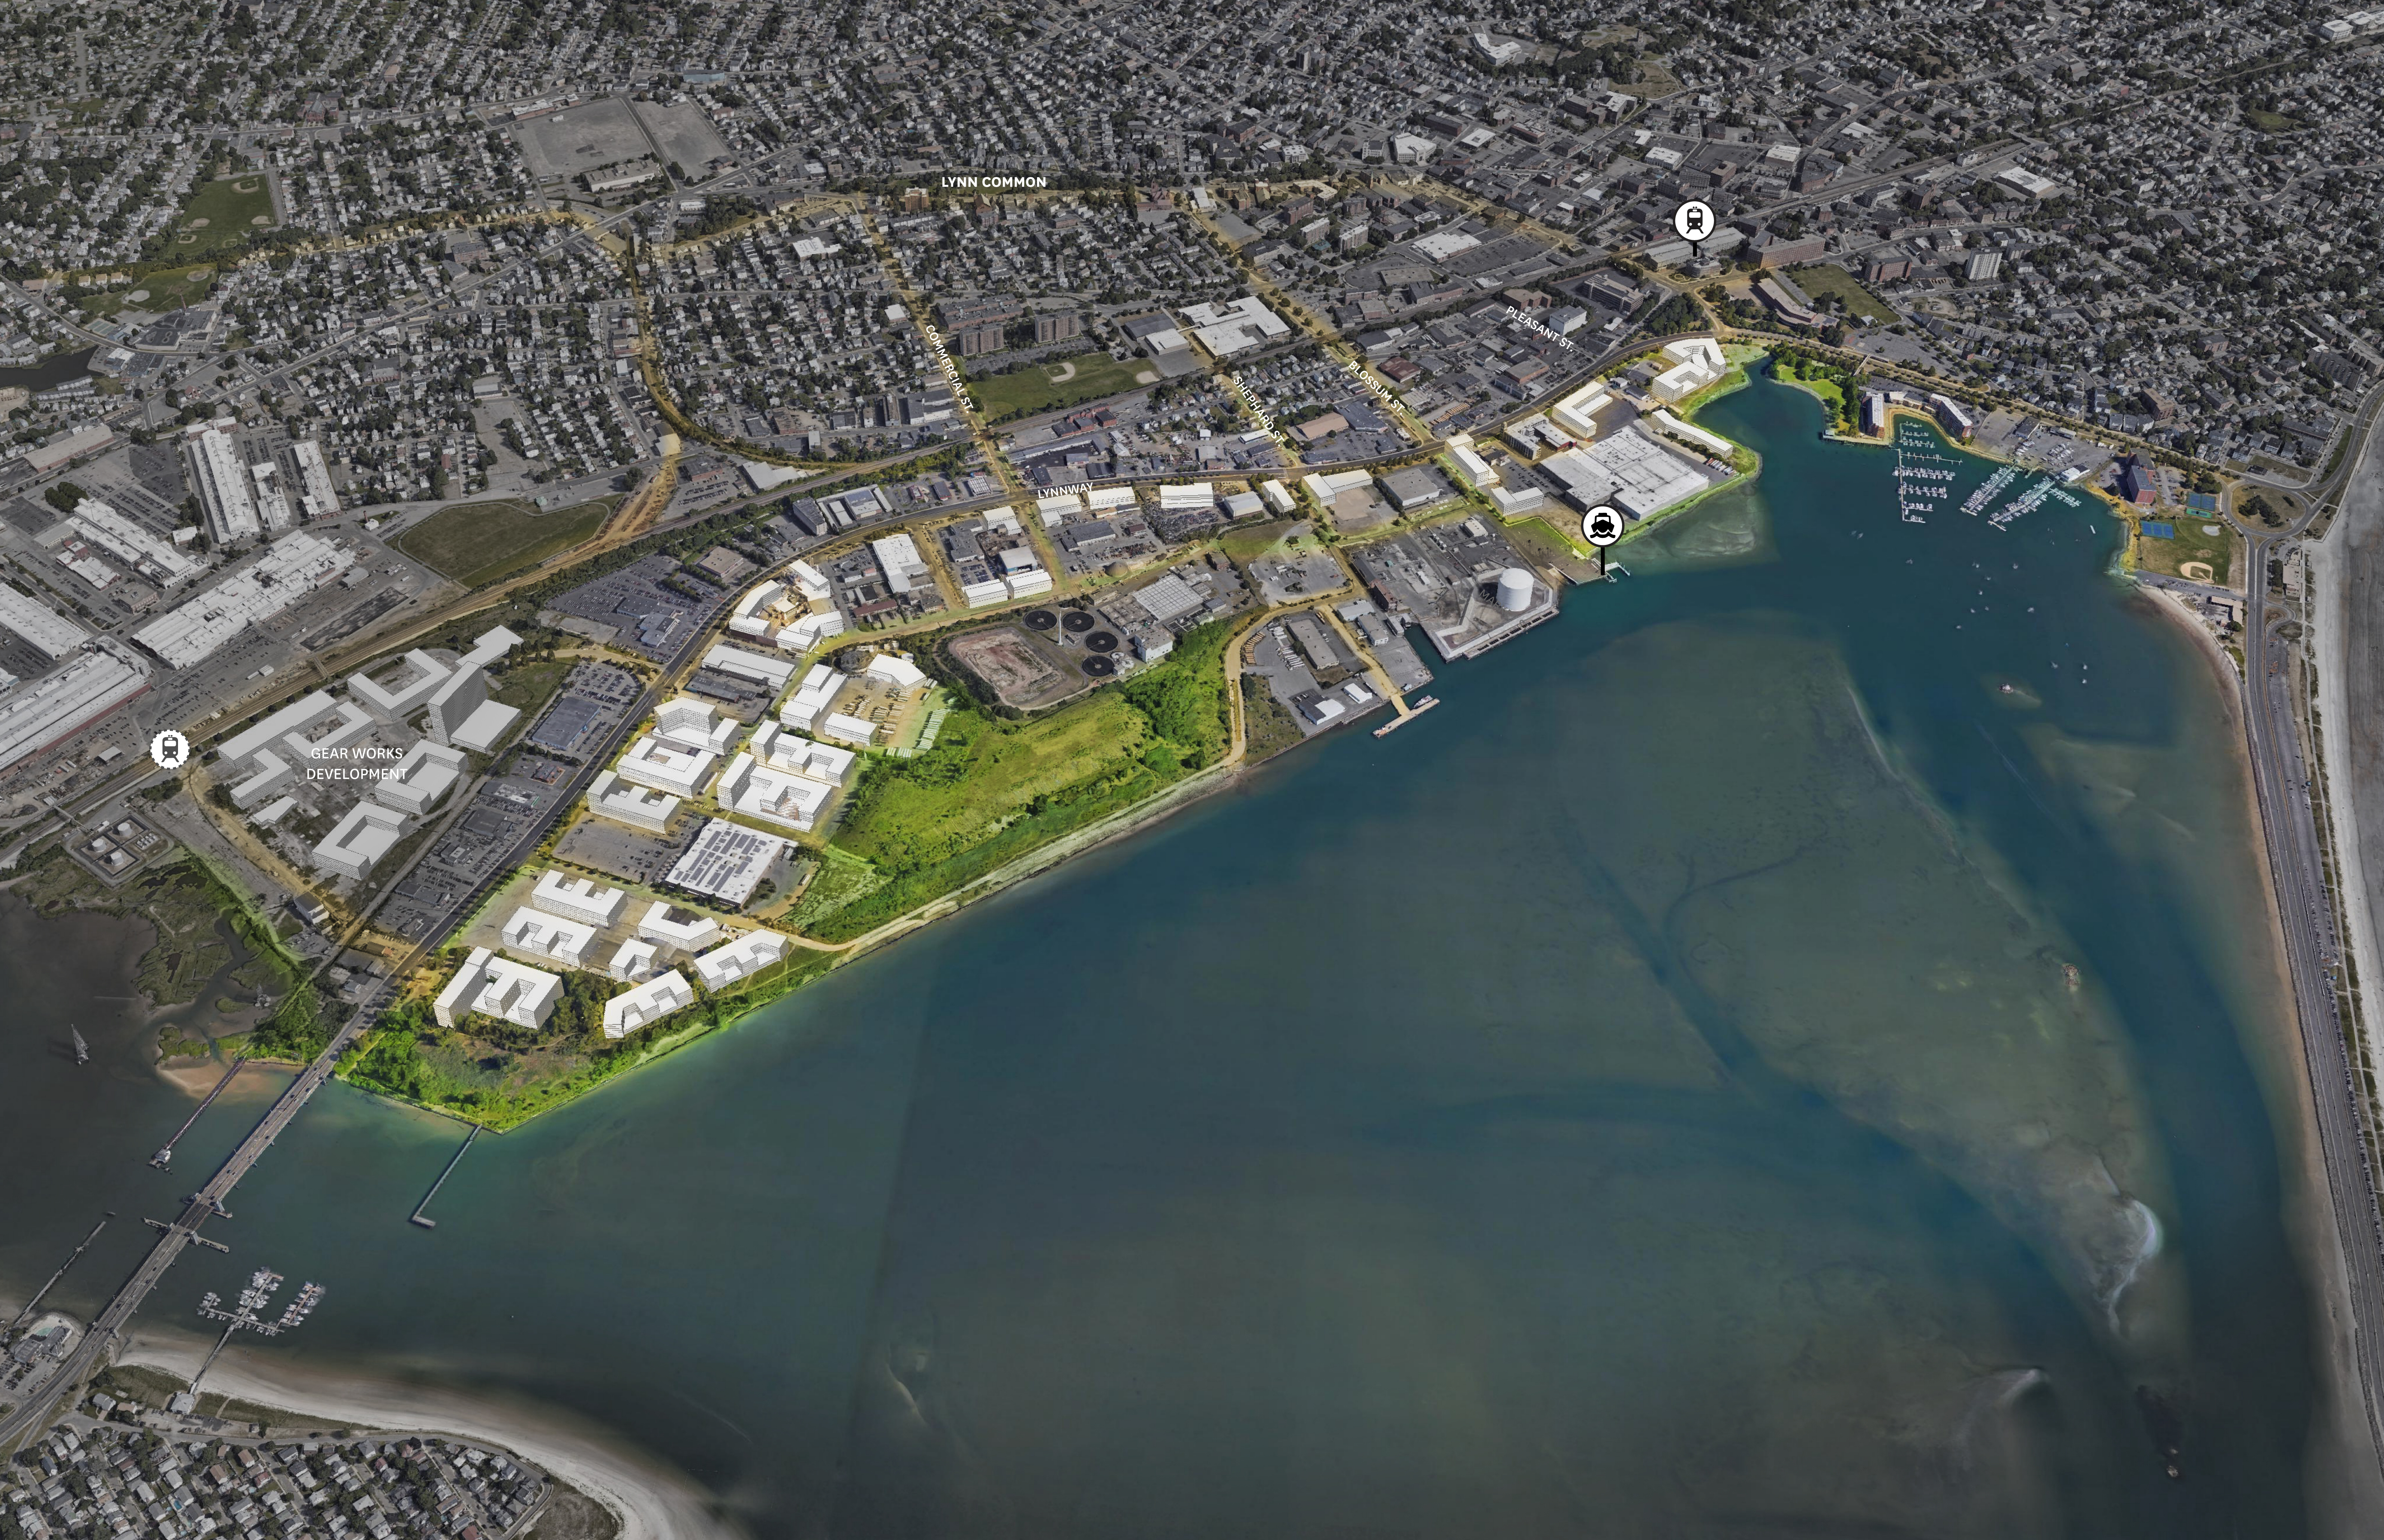 Lynn Revised Waterfront Master Plan process highlighted